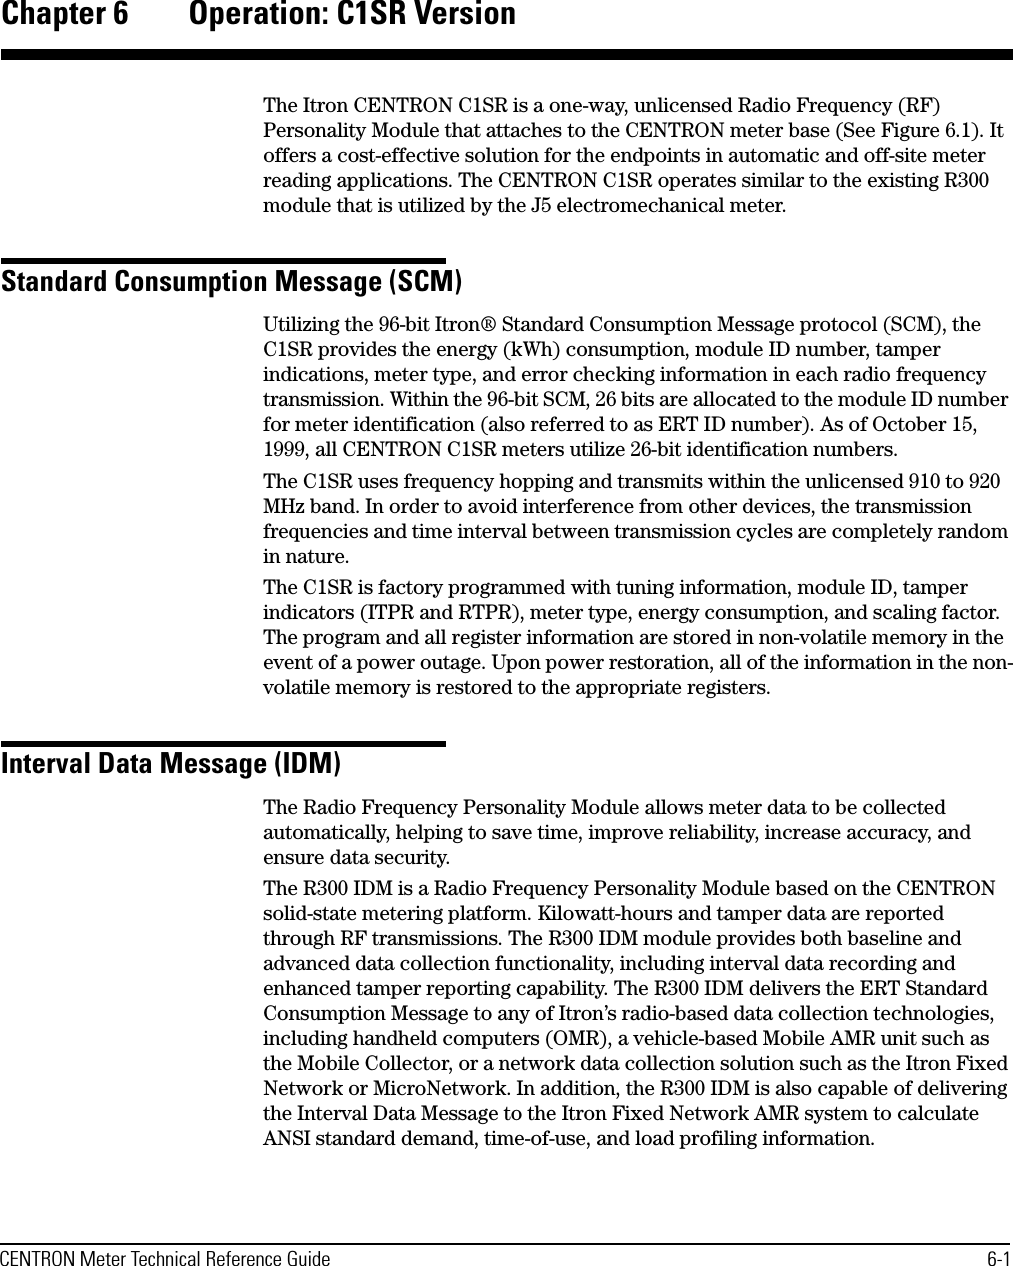 CENTRON Meter Technical Reference Guide 6-1Chapter 6 Operation: C1SR VersionThe Itron CENTRON C1SR is a one-way, unlicensed Radio Frequency (RF) Personality Module that attaches to the CENTRON meter base (See Figure 6.1). It offers a cost-effective solution for the endpoints in automatic and off-site meter reading applications. The CENTRON C1SR operates similar to the existing R300 module that is utilized by the J5 electromechanical meter.Standard Consumption Message (SCM)Utilizing the 96-bit Itron® Standard Consumption Message protocol (SCM), the C1SR provides the energy (kWh) consumption, module ID number, tamper indications, meter type, and error checking information in each radio frequency transmission. Within the 96-bit SCM, 26 bits are allocated to the module ID number for meter identification (also referred to as ERT ID number). As of October 15, 1999, all CENTRON C1SR meters utilize 26-bit identification numbers.The C1SR uses frequency hopping and transmits within the unlicensed 910 to 920 MHz band. In order to avoid interference from other devices, the transmission frequencies and time interval between transmission cycles are completely random in nature.The C1SR is factory programmed with tuning information, module ID, tamper indicators (ITPR and RTPR), meter type, energy consumption, and scaling factor. The program and all register information are stored in non-volatile memory in the event of a power outage. Upon power restoration, all of the information in the non-volatile memory is restored to the appropriate registers.Interval Data Message (IDM)The Radio Frequency Personality Module allows meter data to be collected automatically, helping to save time, improve reliability, increase accuracy, and ensure data security.The R300 IDM is a Radio Frequency Personality Module based on the CENTRON solid-state metering platform. Kilowatt-hours and tamper data are reported through RF transmissions. The R300 IDM module provides both baseline and advanced data collection functionality, including interval data recording and enhanced tamper reporting capability. The R300 IDM delivers the ERT Standard Consumption Message to any of Itron’s radio-based data collection technologies, including handheld computers (OMR), a vehicle-based Mobile AMR unit such as the Mobile Collector, or a network data collection solution such as the Itron Fixed Network or MicroNetwork. In addition, the R300 IDM is also capable of delivering the Interval Data Message to the Itron Fixed Network AMR system to calculate ANSI standard demand, time-of-use, and load profiling information.